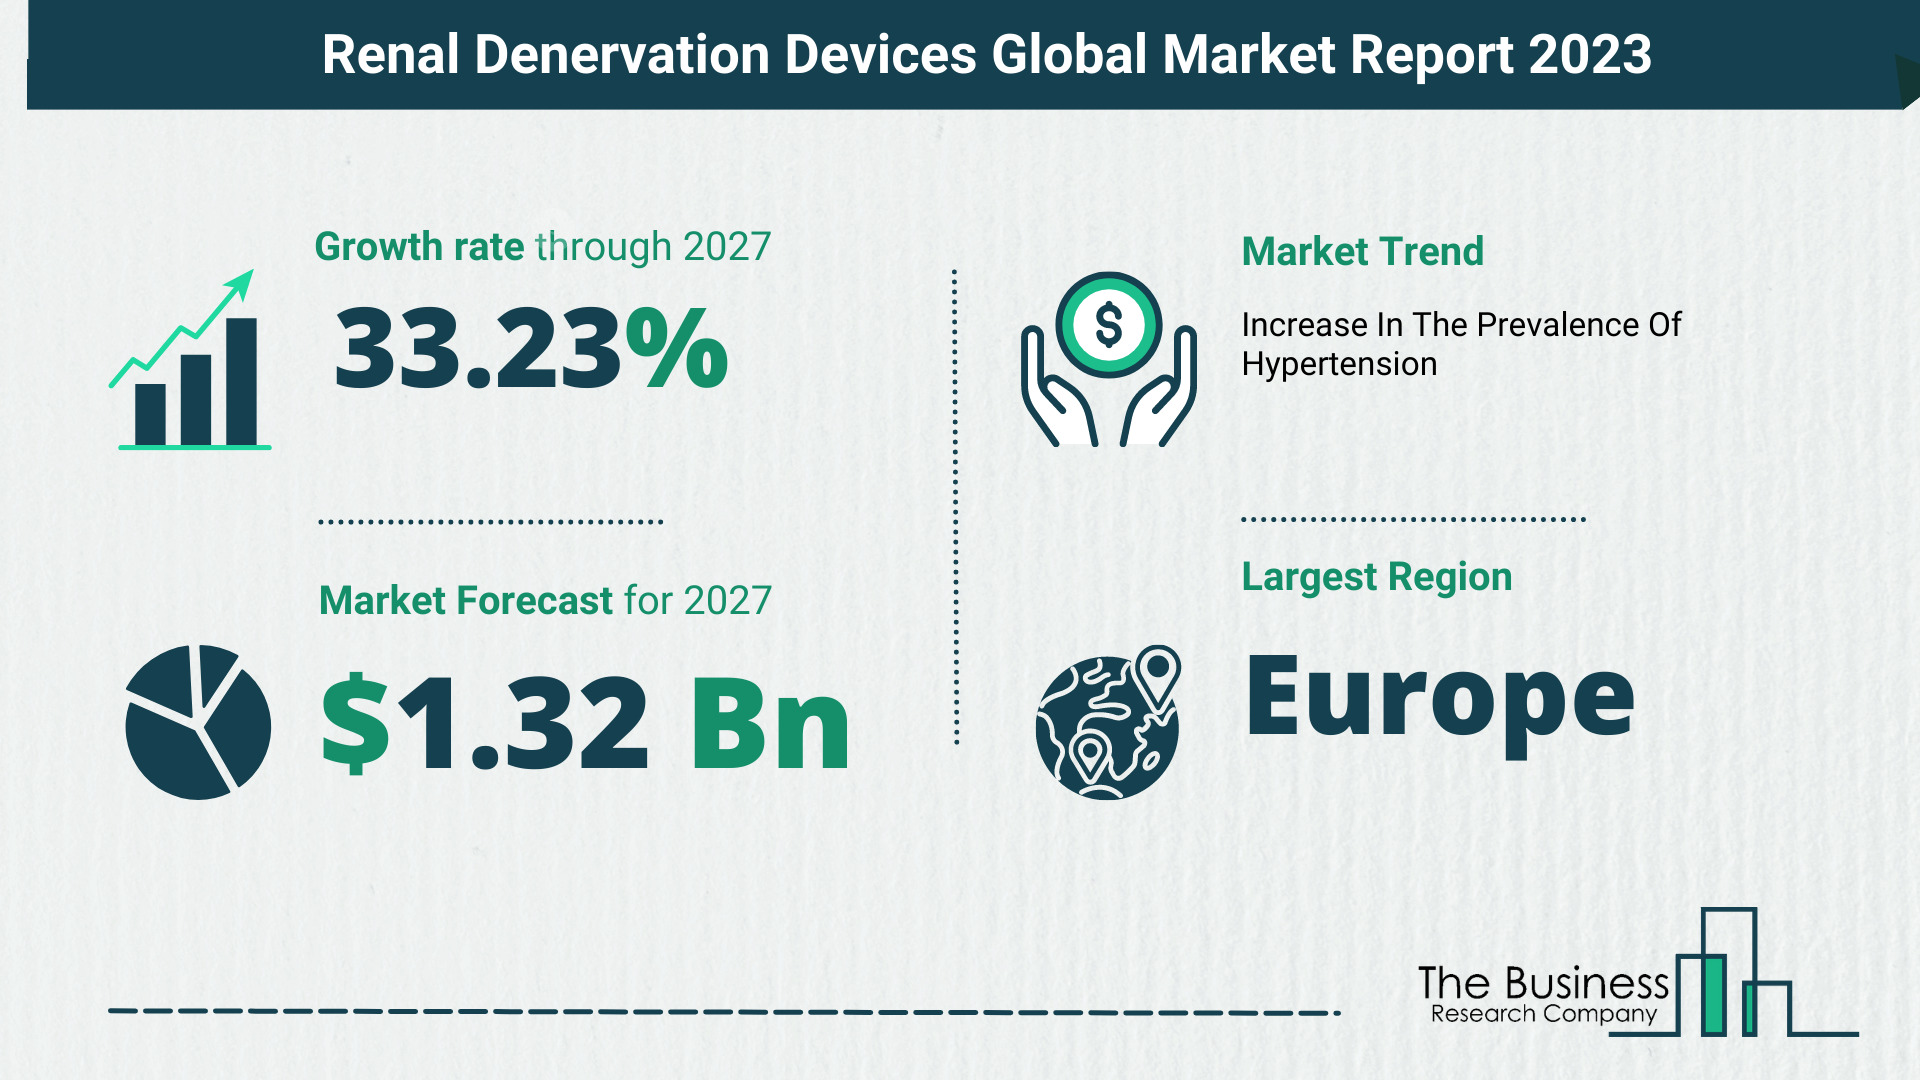 Global Renal Denervation Devices Market Opportunities And Strategies 2023